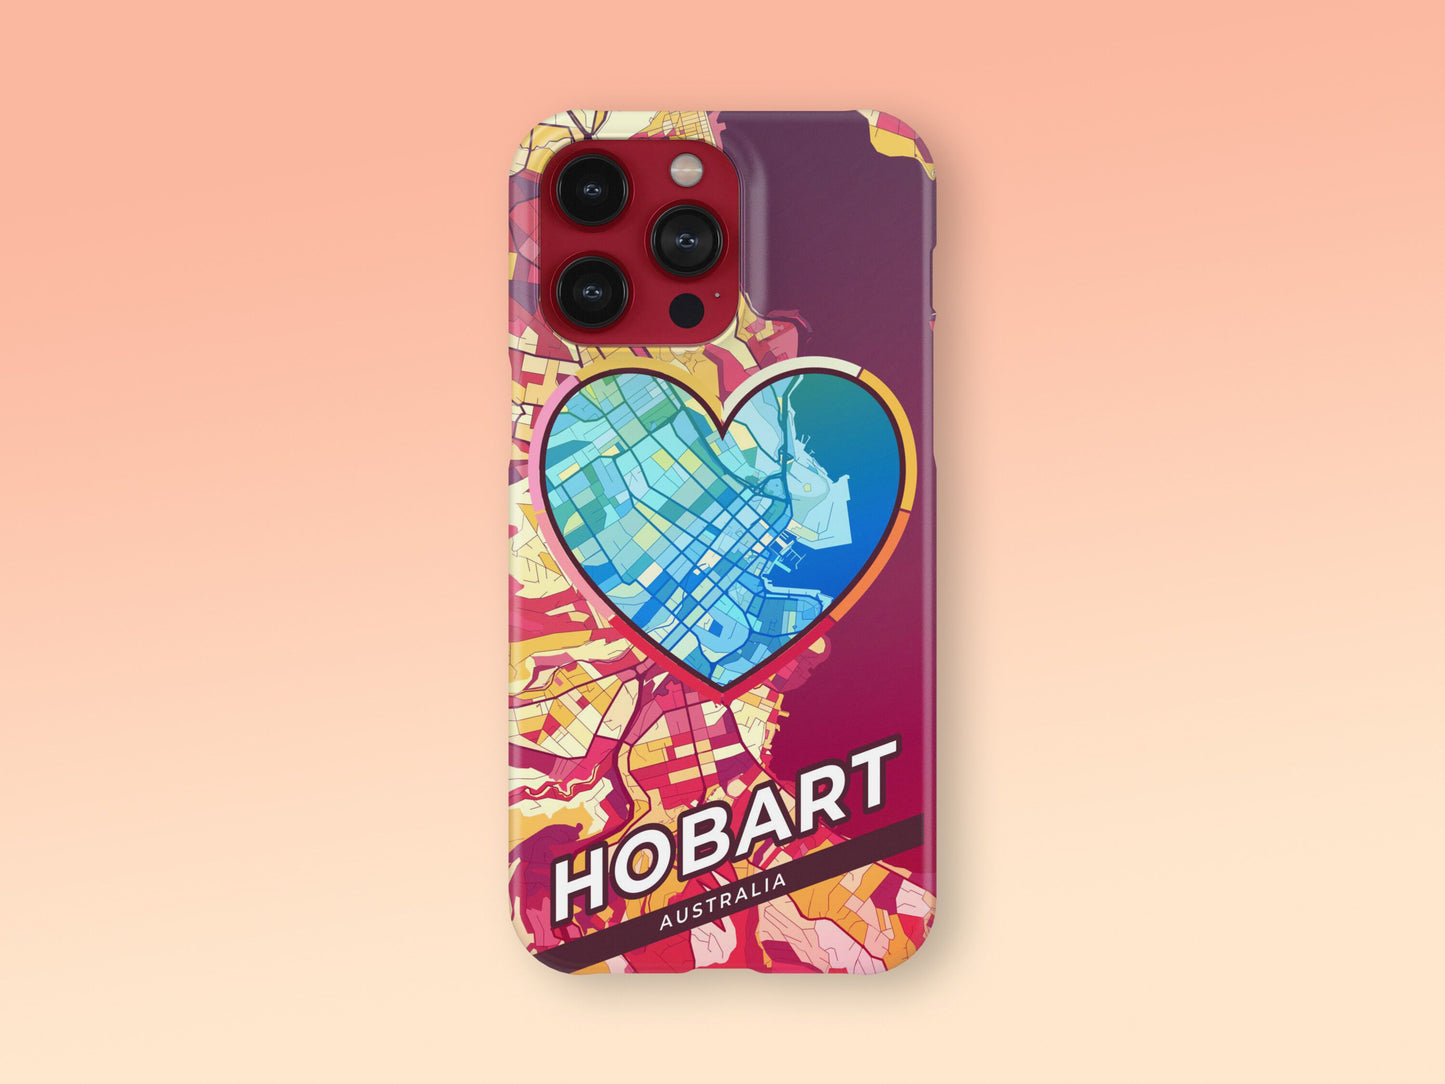 Hobart Australia slim phone case with colorful icon. Birthday, wedding or housewarming gift. Couple match cases. 2